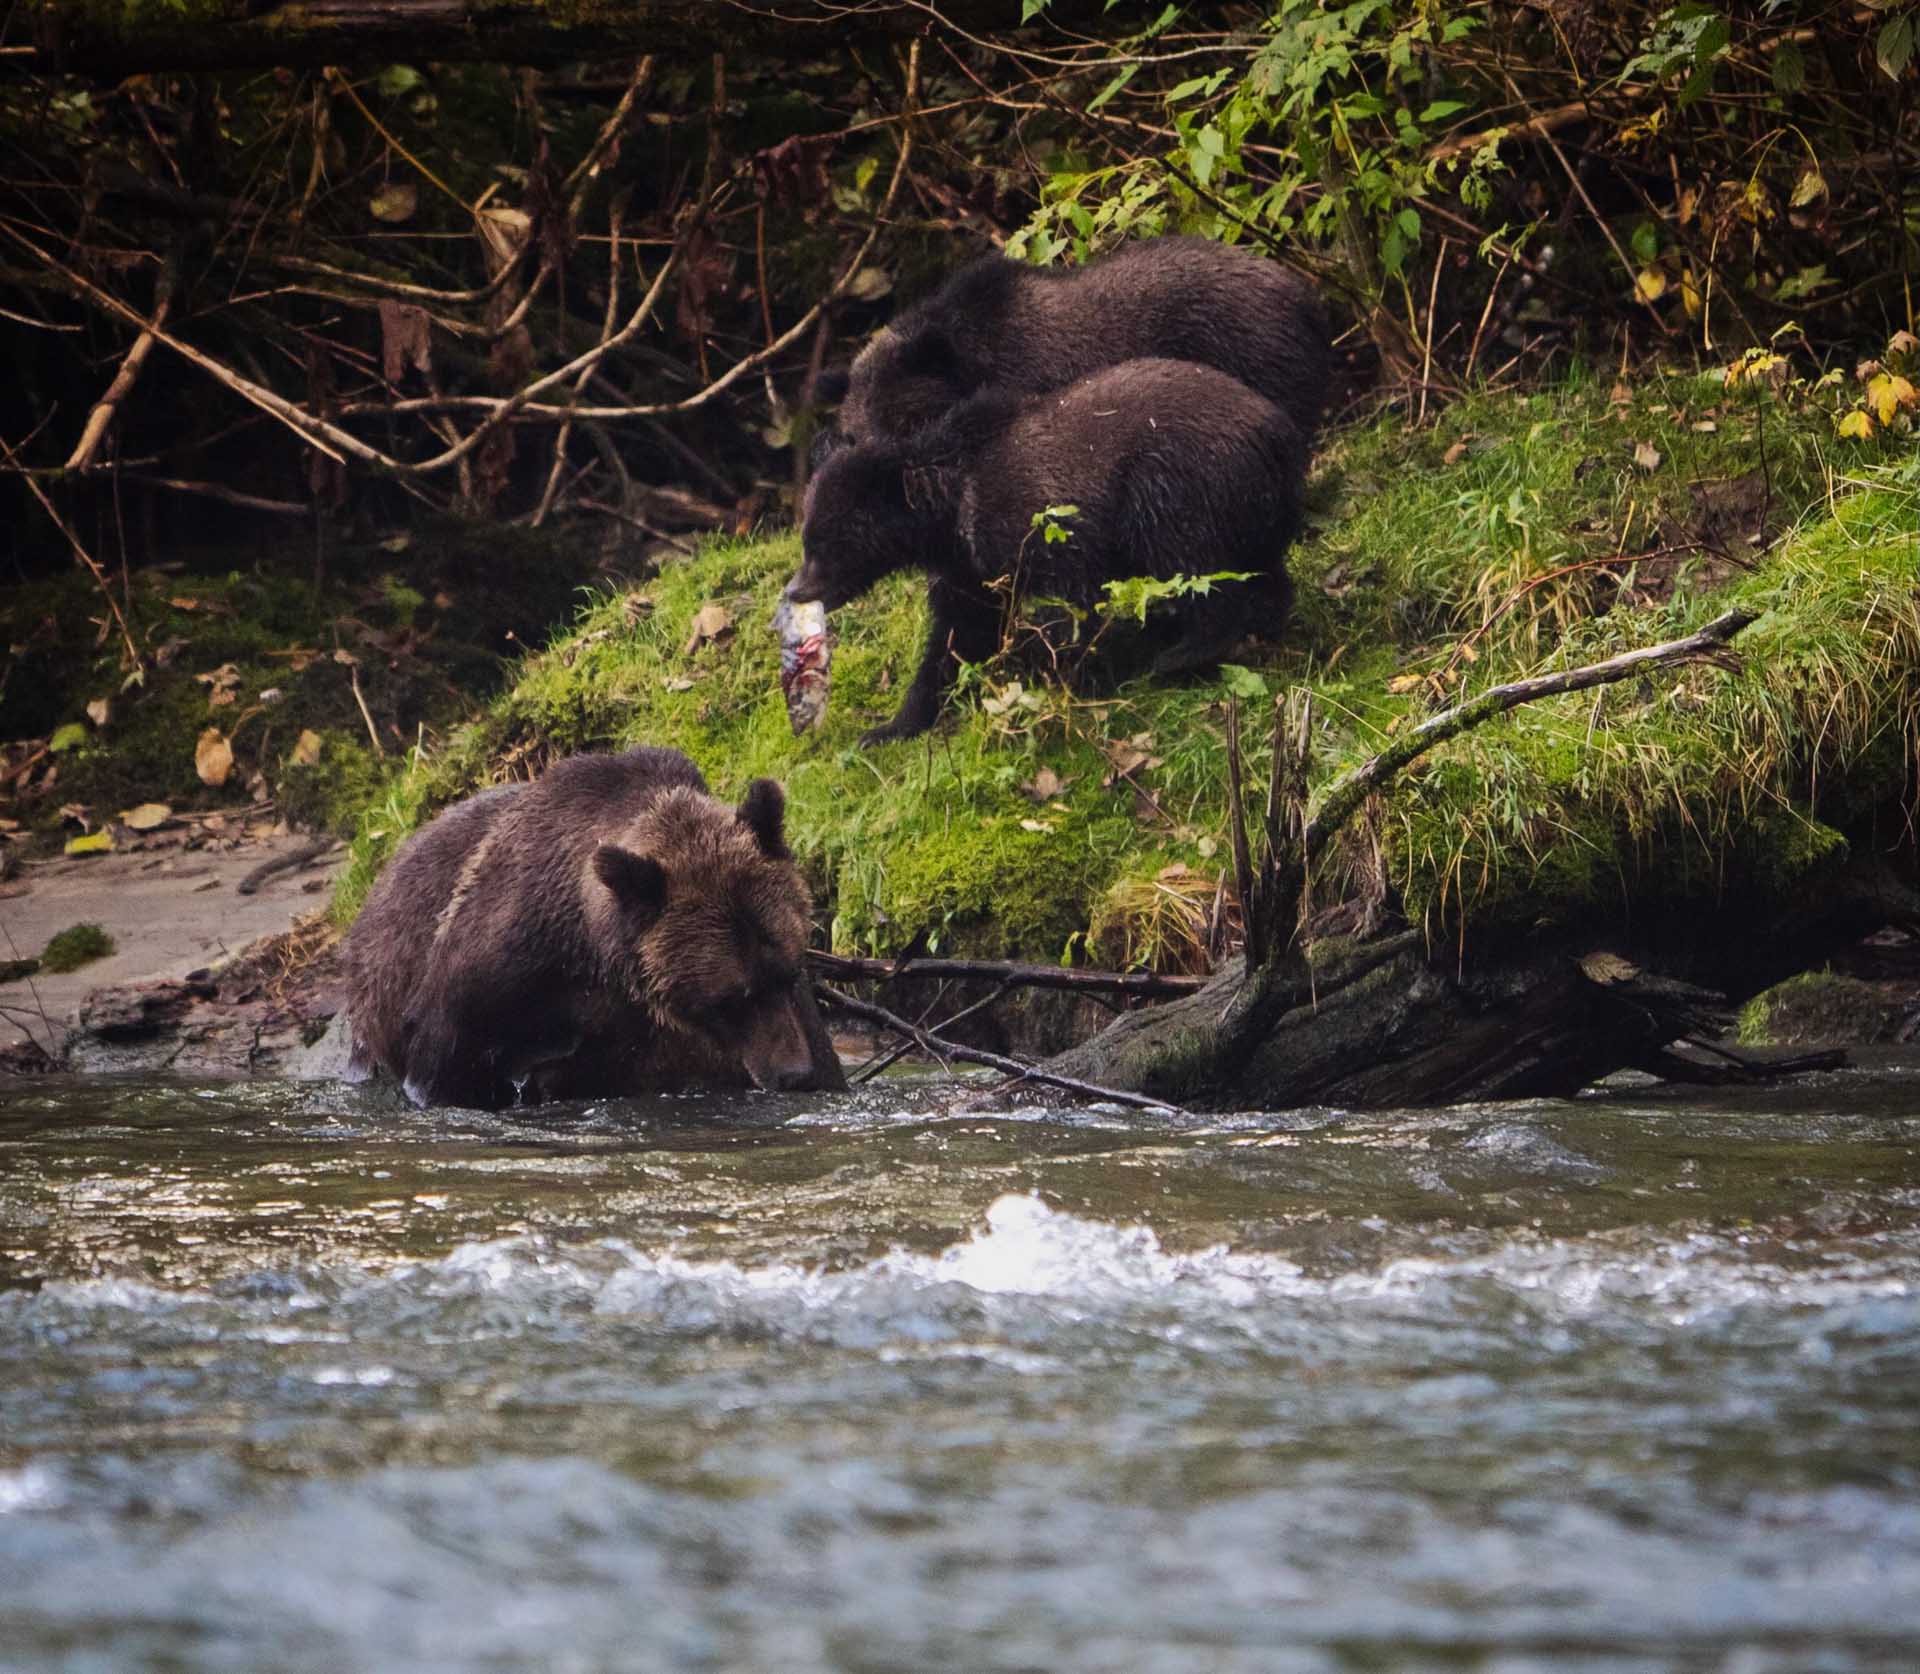 Vancouver Island: A Guide to Northern Vancouver Island, Abby tait, Photo credit: @st_scotty, bears on the banks of river/lake